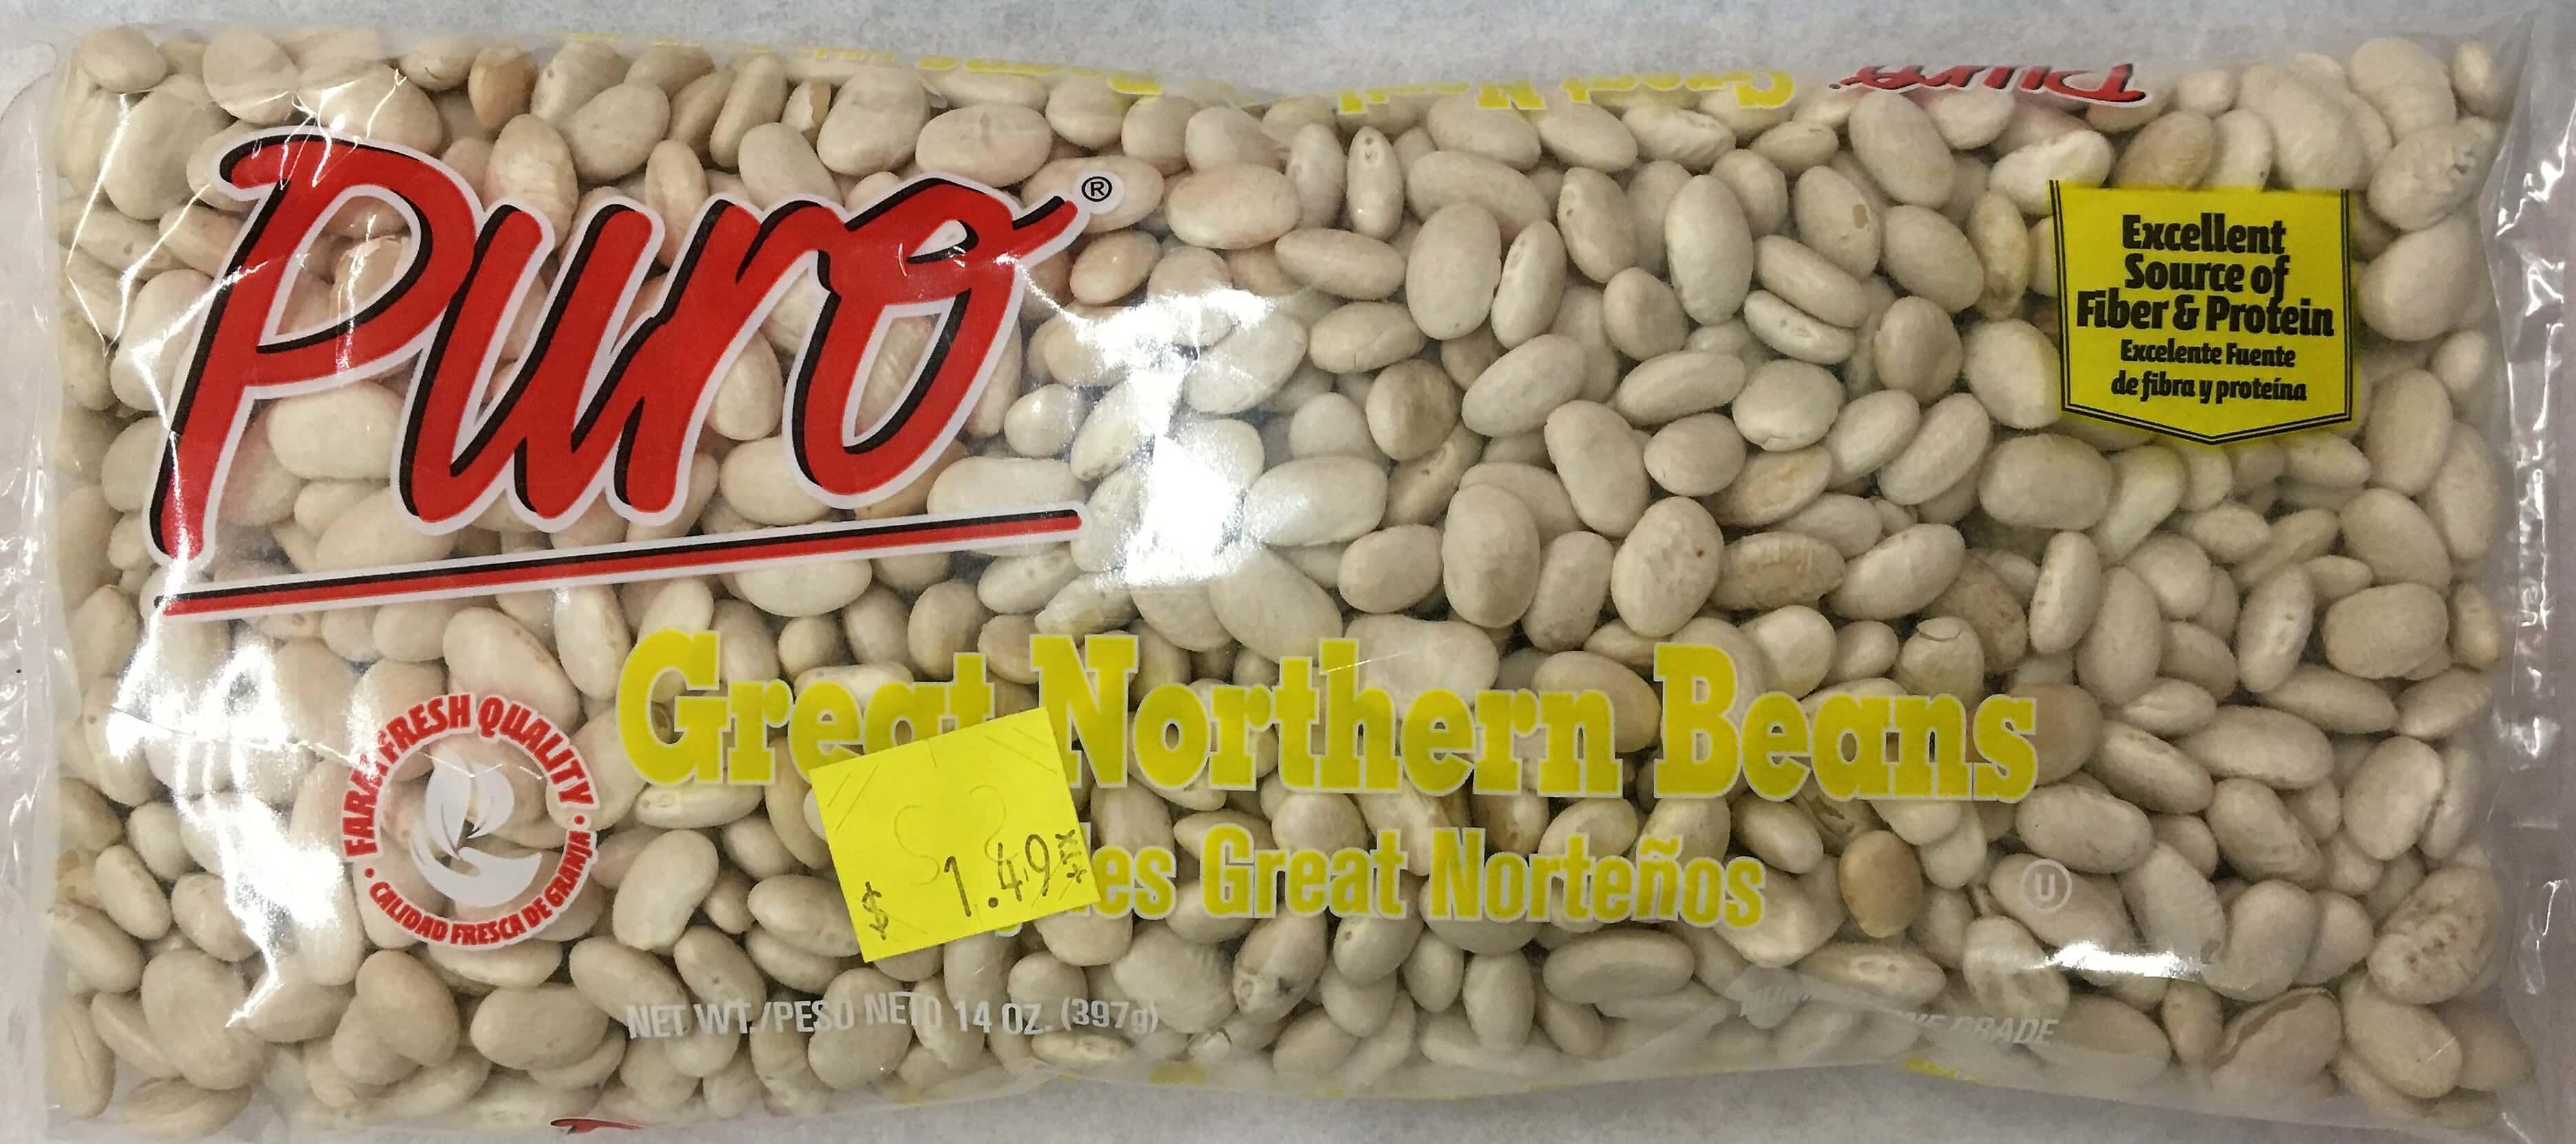 Puro - Great Northern Beans 14oz.